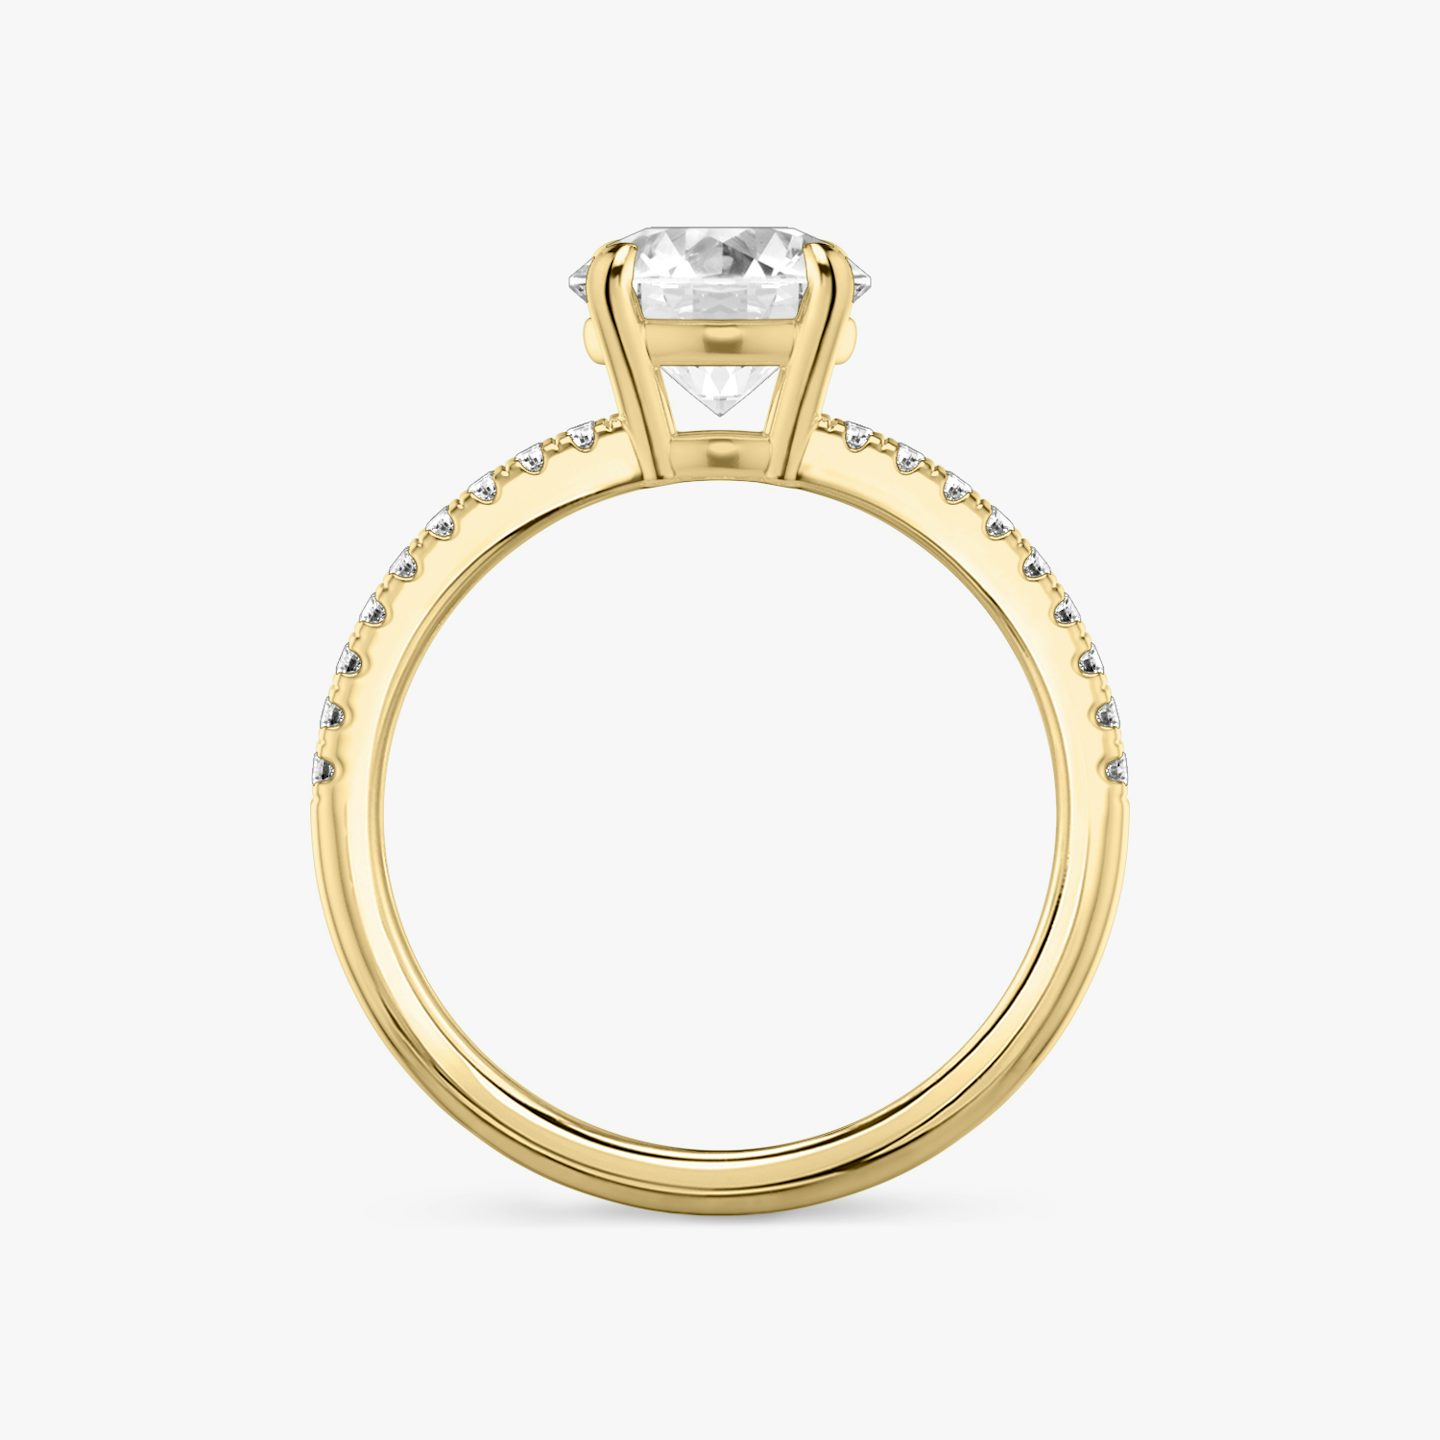 The Double Band | Round Brilliant | 18k | 18k Yellow Gold | Band: Pavé | Carat weight: 1 | Band stone shape: Round Brilliant | Diamond orientation: vertical